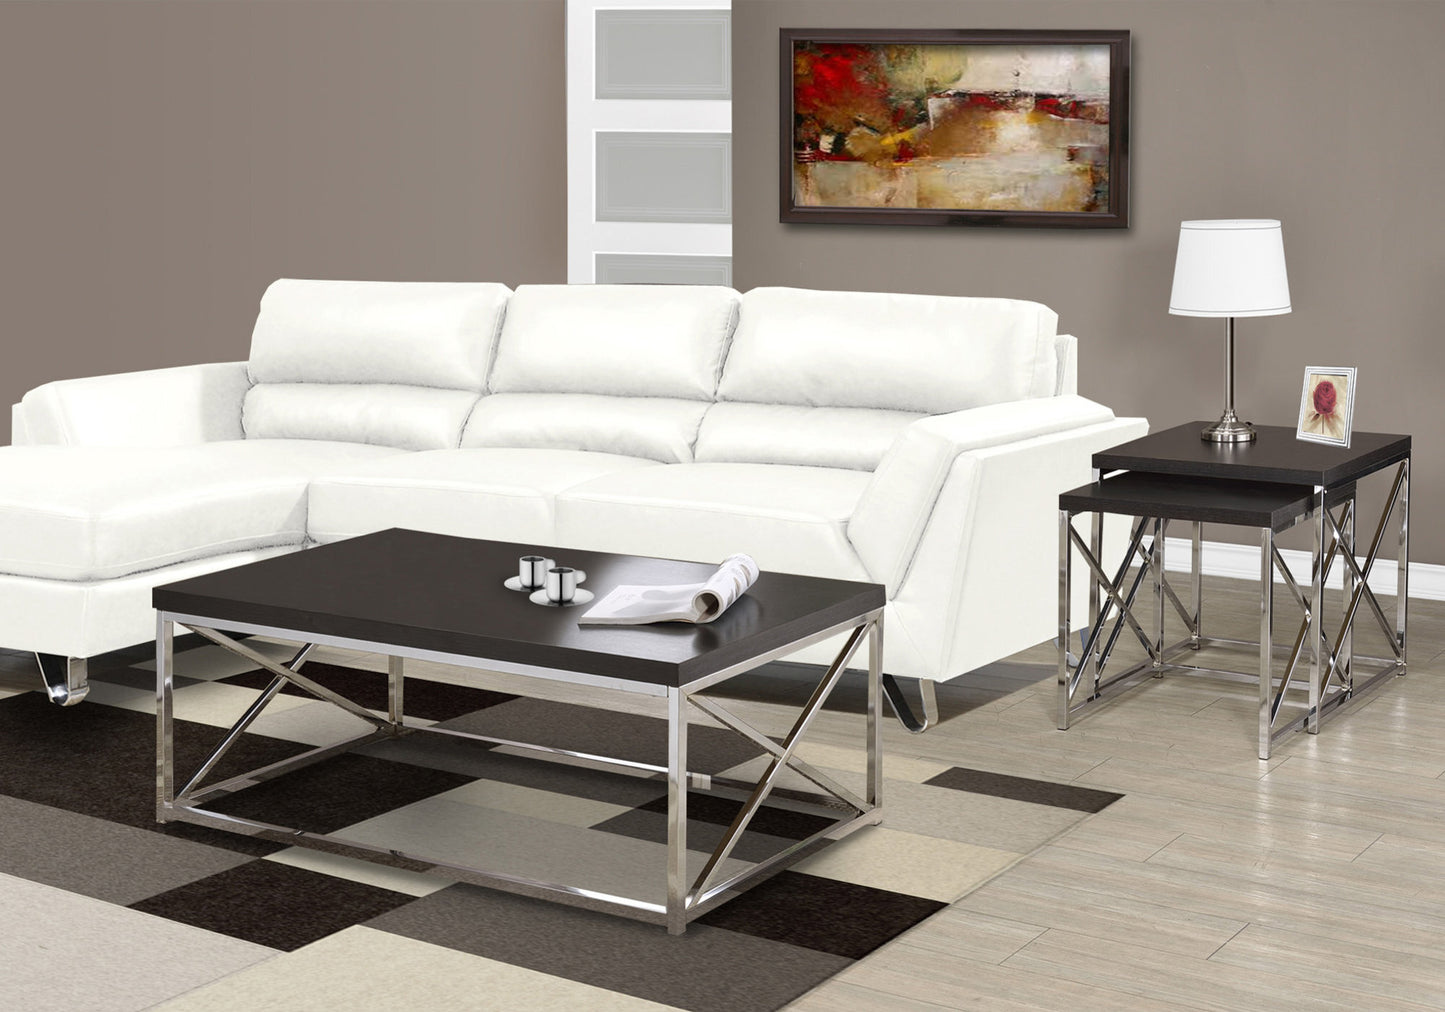 X Trestle Cappuccino and Chrome Coffee Table